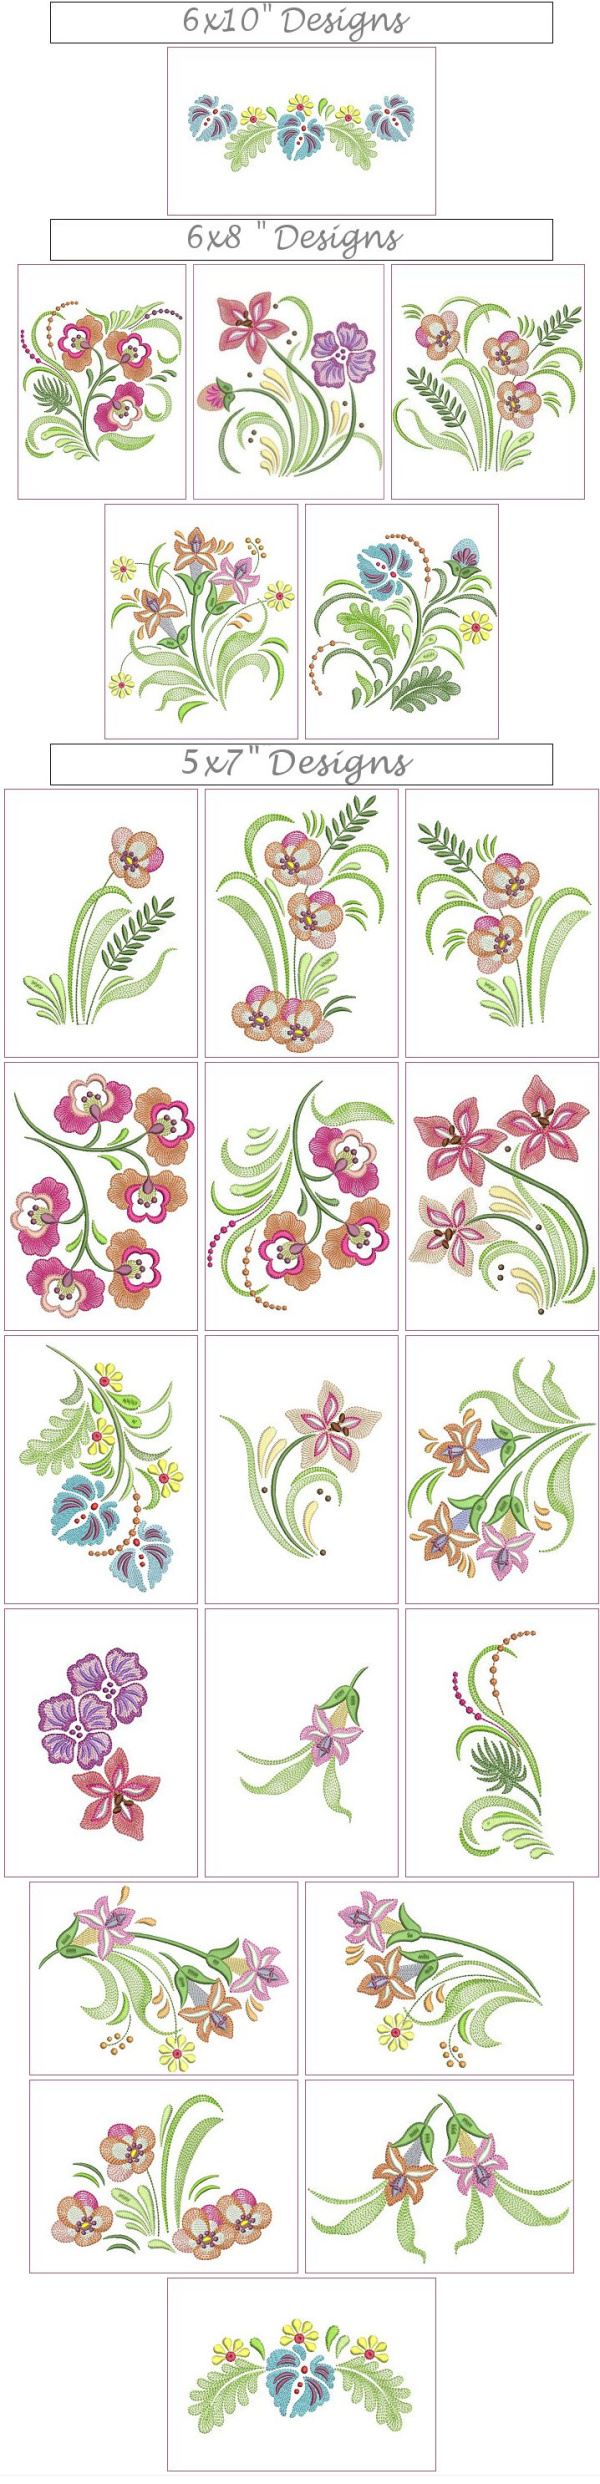 INTRO PRICED: Enchanted Garden Combo 1-Set 1 and 3-3